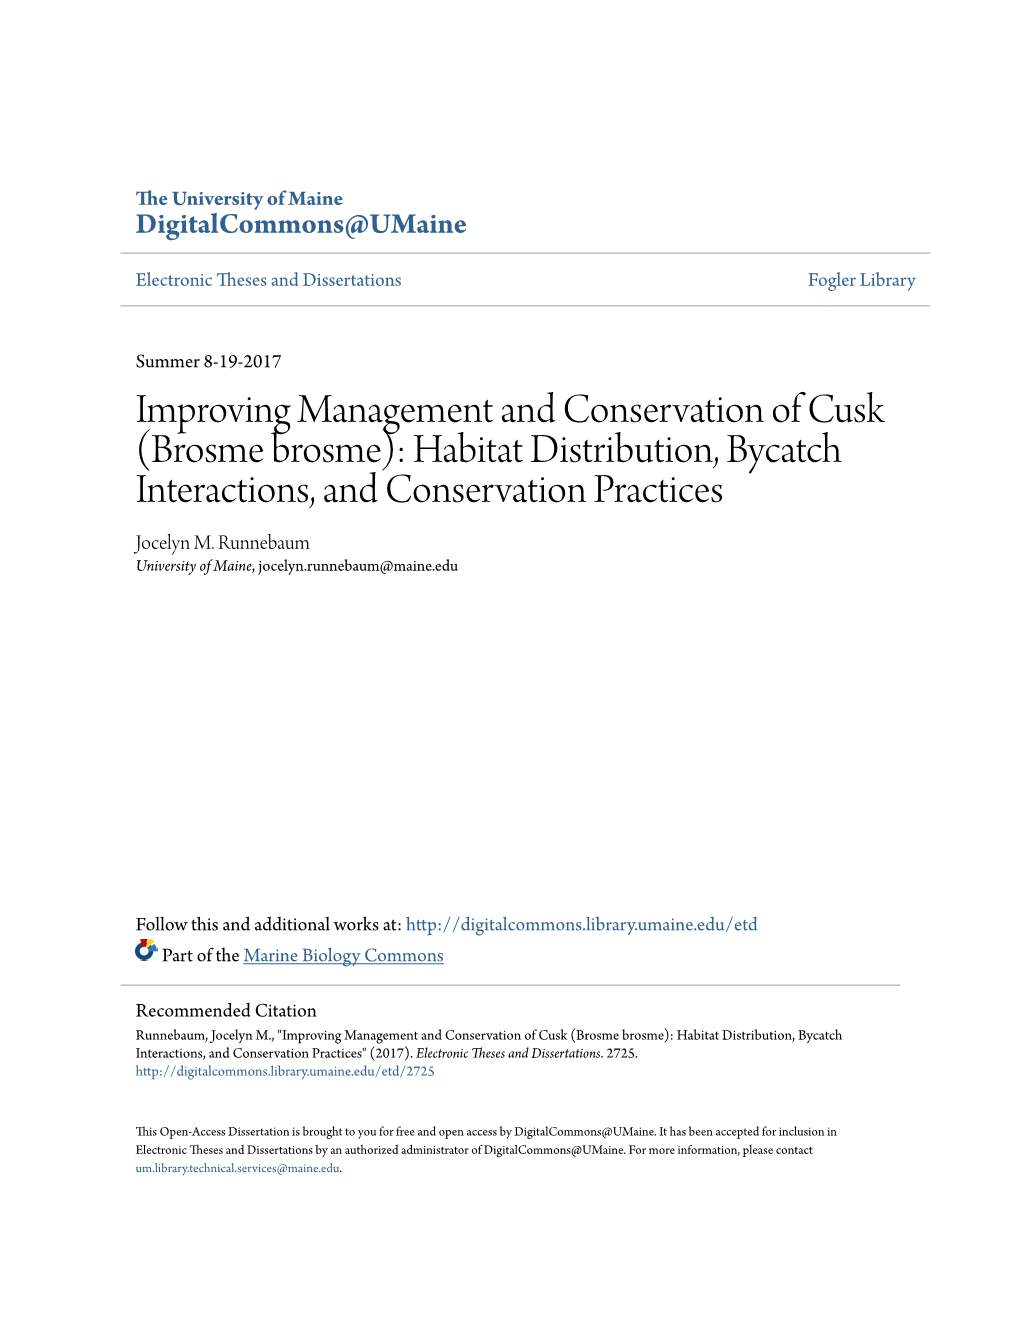 Improving Management and Conservation of Cusk (Brosme Brosme): Habitat Distribution, Bycatch Interactions, and Conservation Practices Jocelyn M